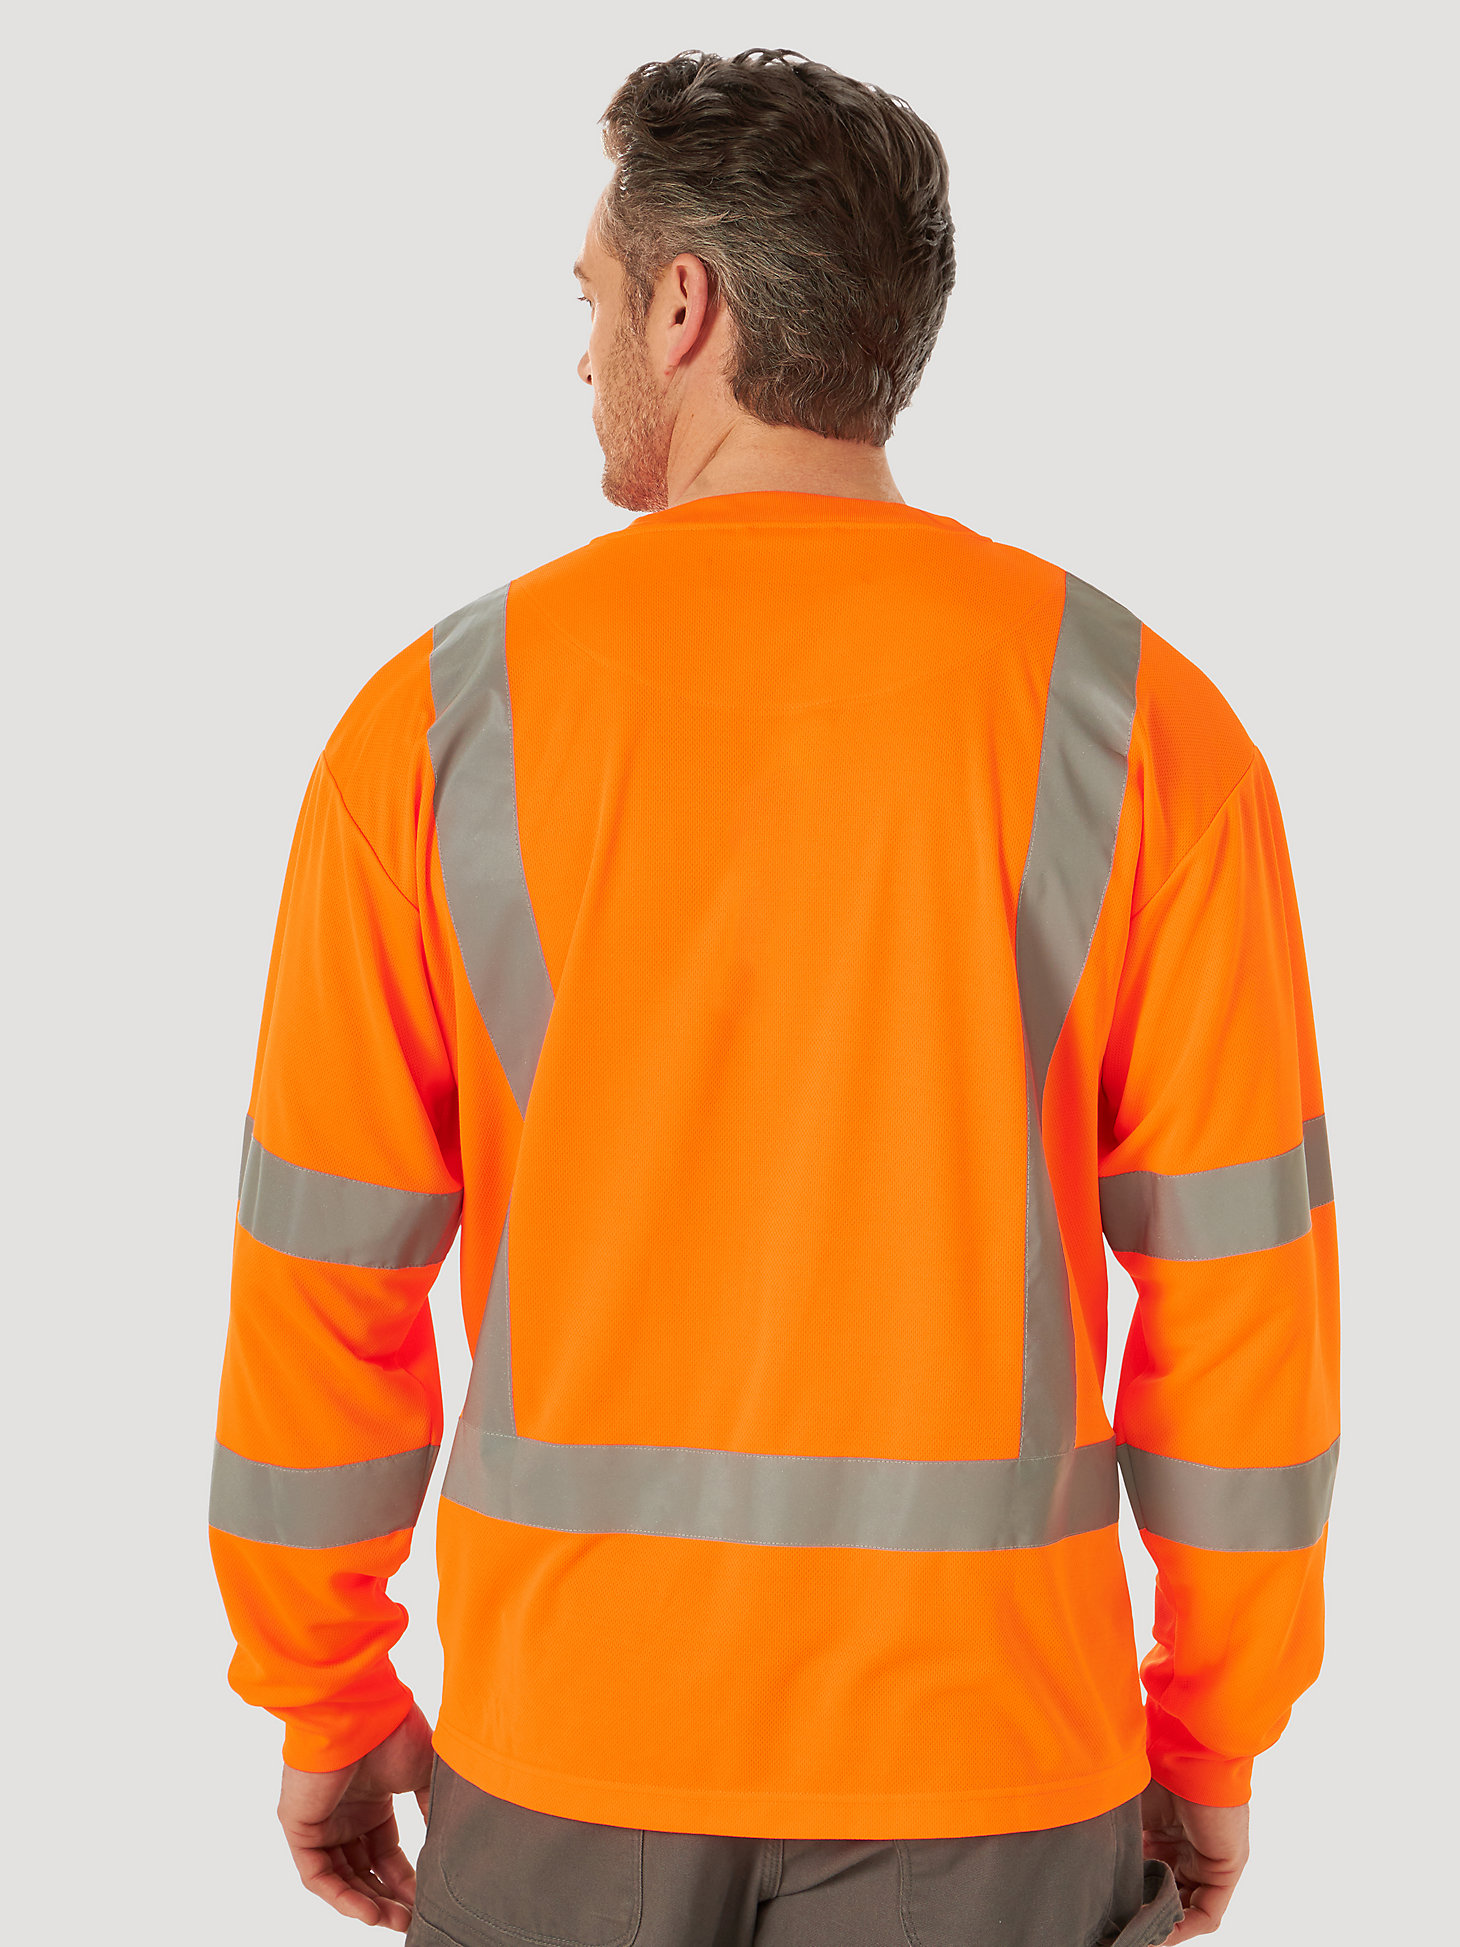 Wrangler® RIGGS Workwear® Long Sleeve High Visibility T-Shirt in Safety Orange alternative view 1